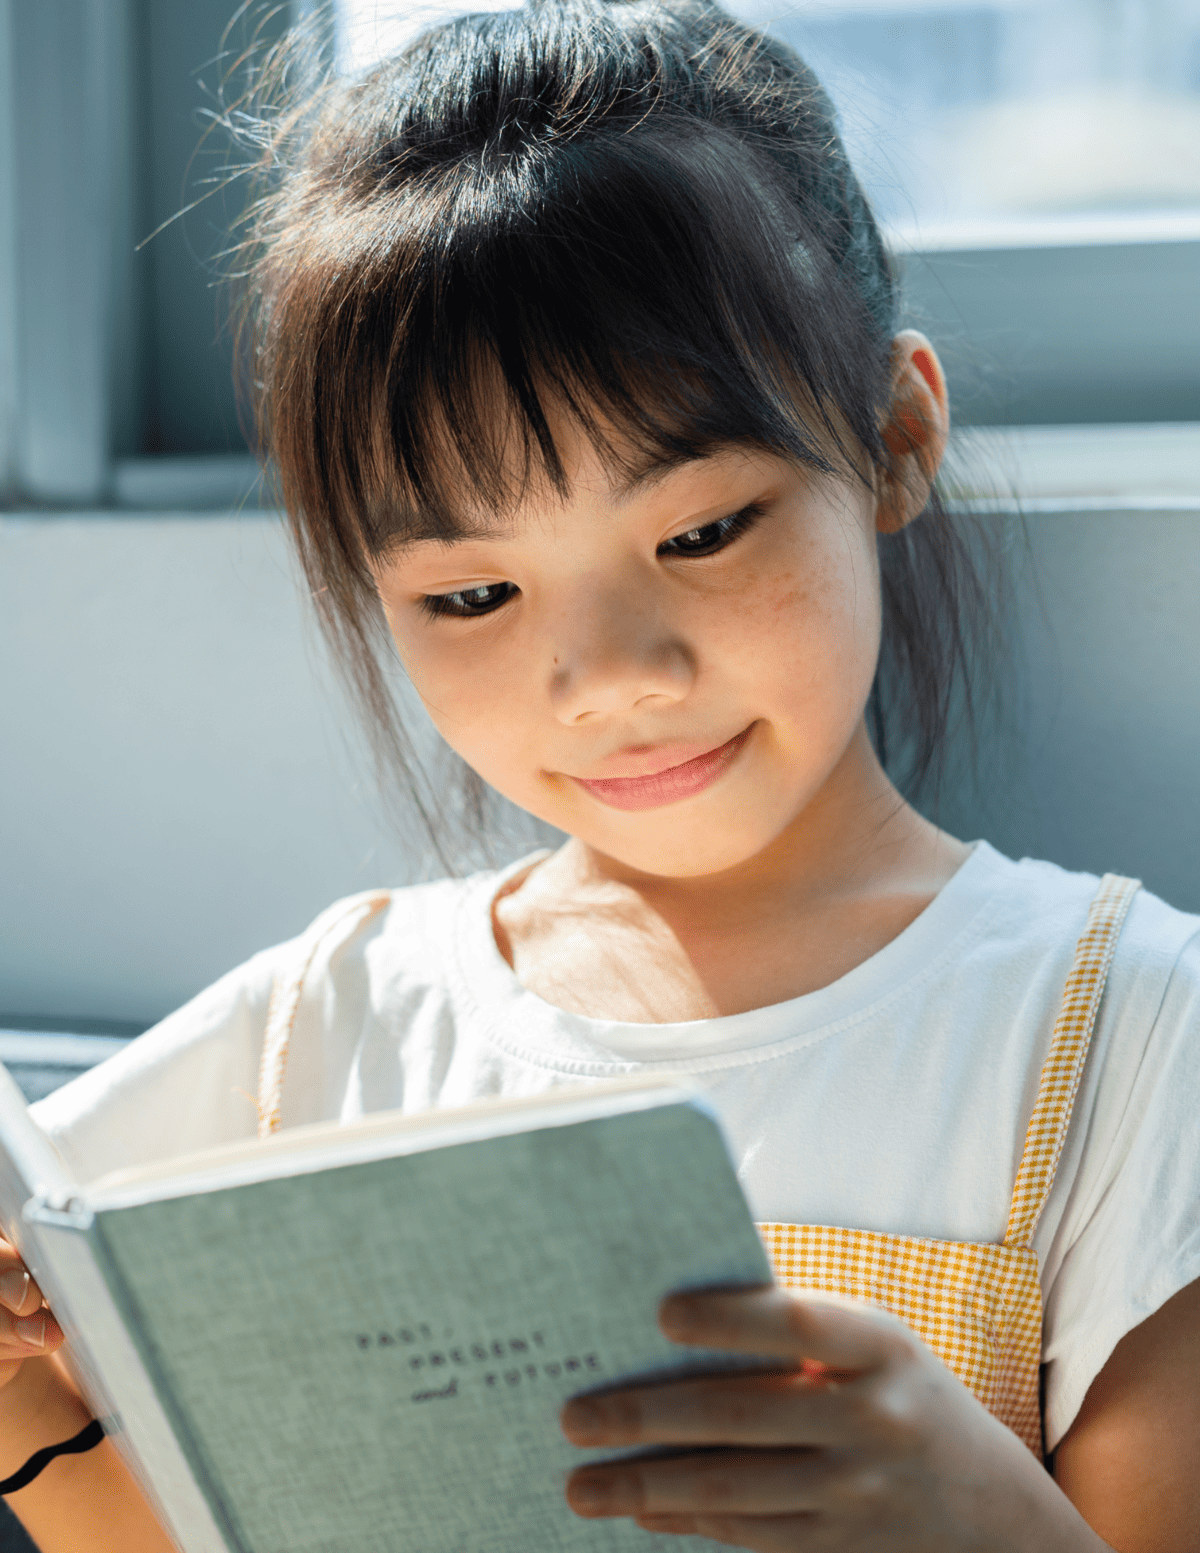 A little girl with black hair smiling, sitting on a couch holding a booklet and reading